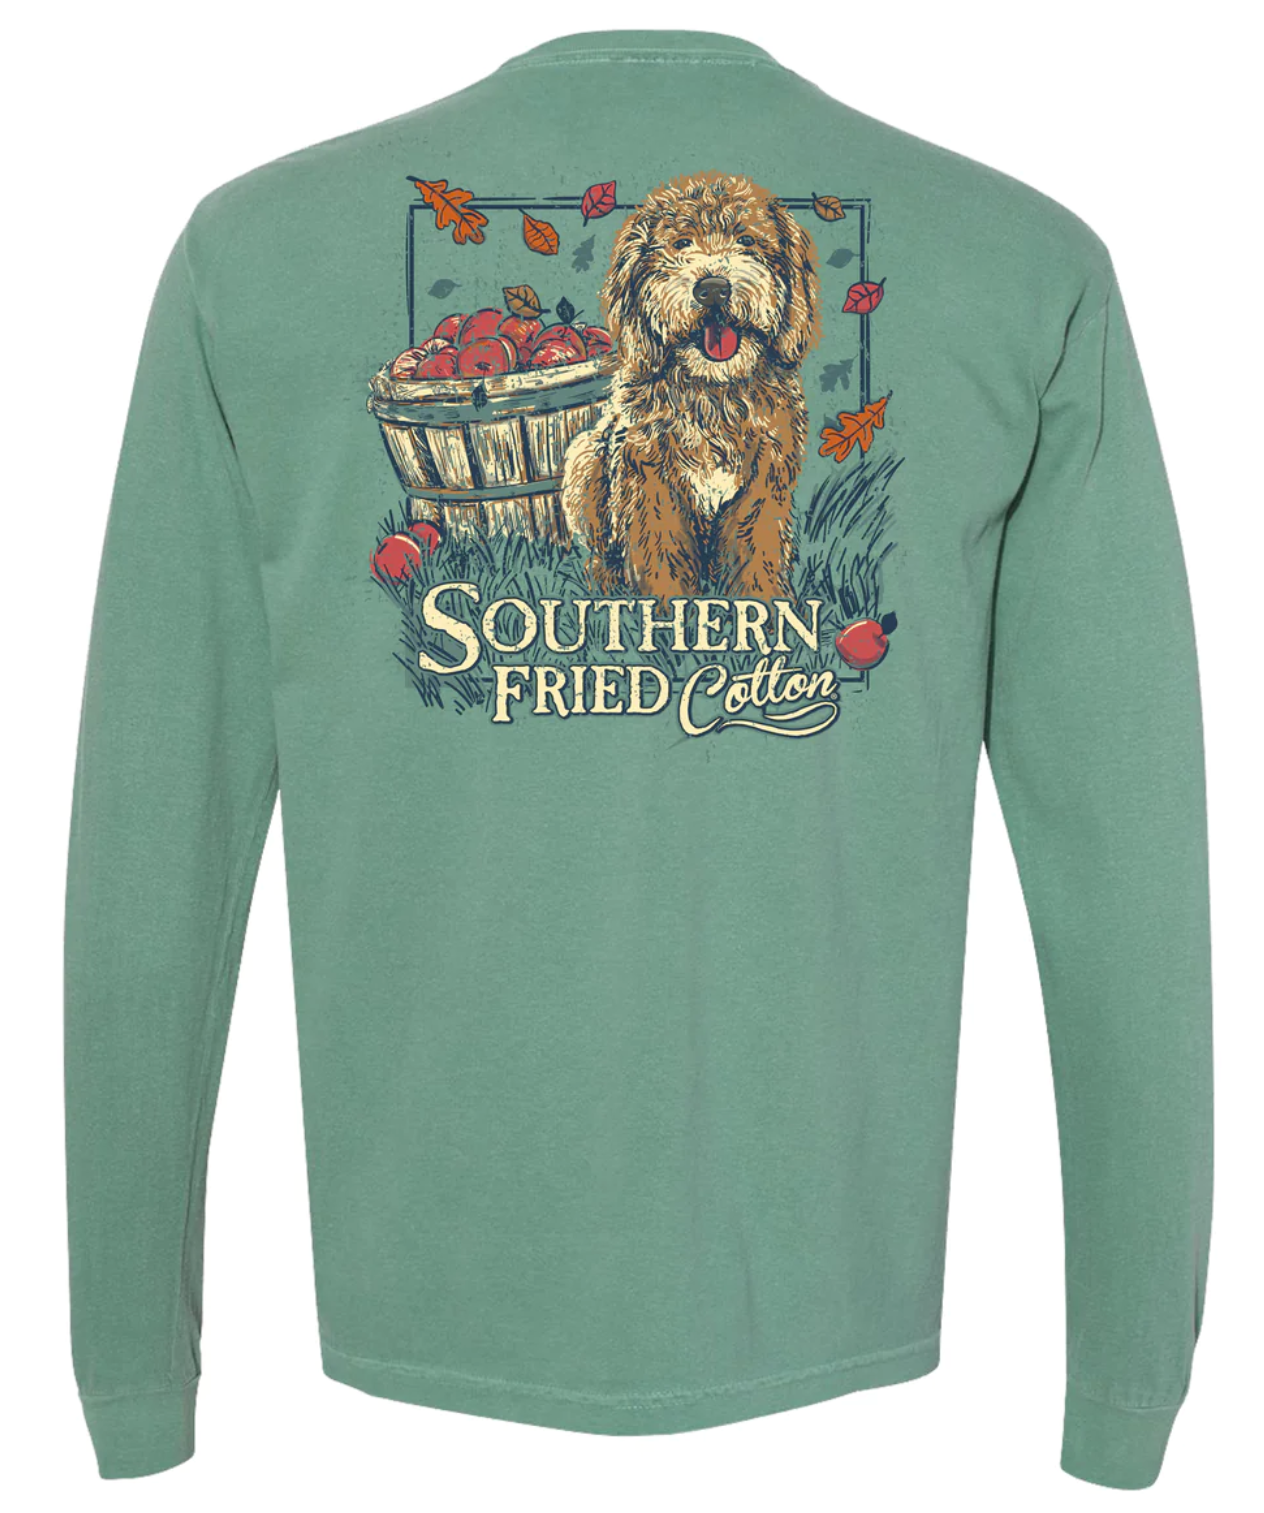 Southern Fried Cotton Fresh off the Tree Long Sleeve T-Shirt